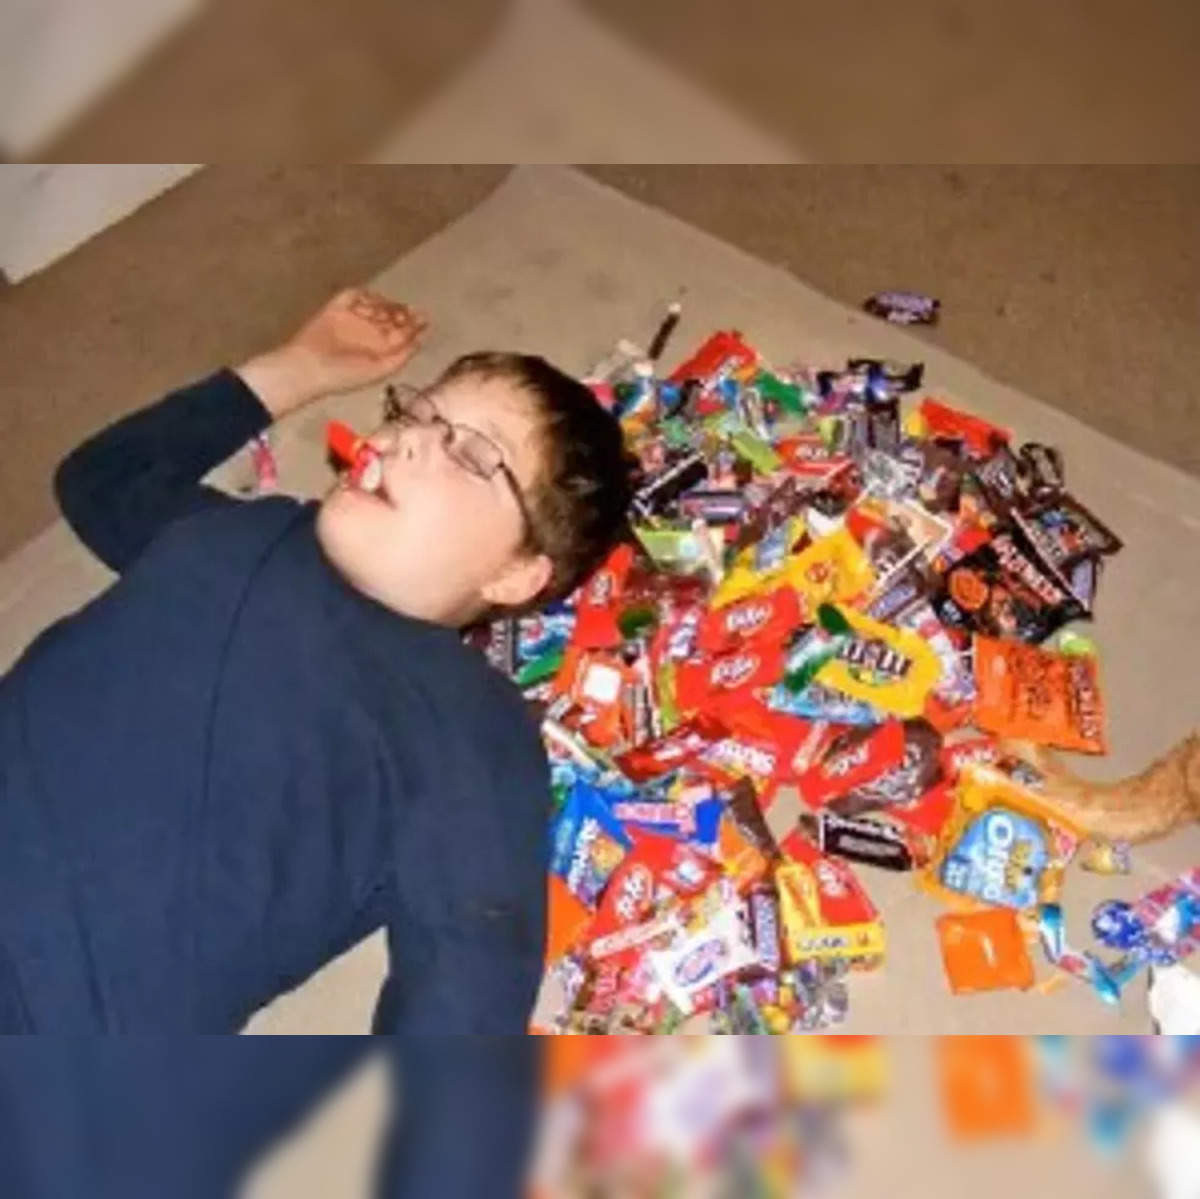 Should You Be Concerned About Drugs in Halloween Candy?